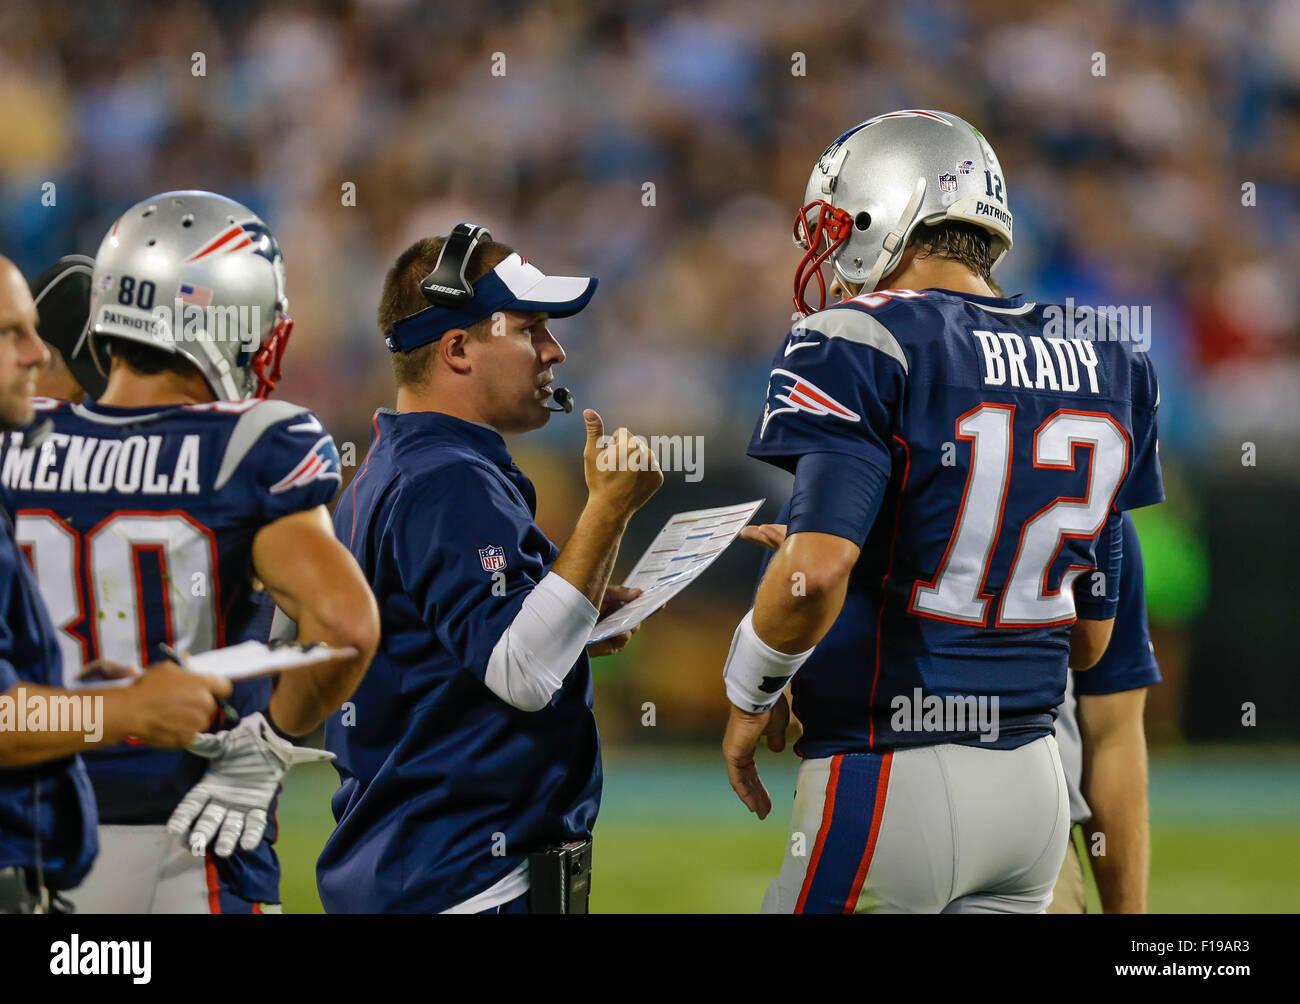 August 28, 2015 Charlotte, New England Patriots quarterback Tom Brady #12 confers with offensive coordinator Josh McDaniels in a game against the Carolina Panthers on August 28, 2015, at Bank of America Stadium in Charlotte, North Carolina. The Patriots defeated the Panthers 17-16. Margaret Bowles/CSM Stock Photo